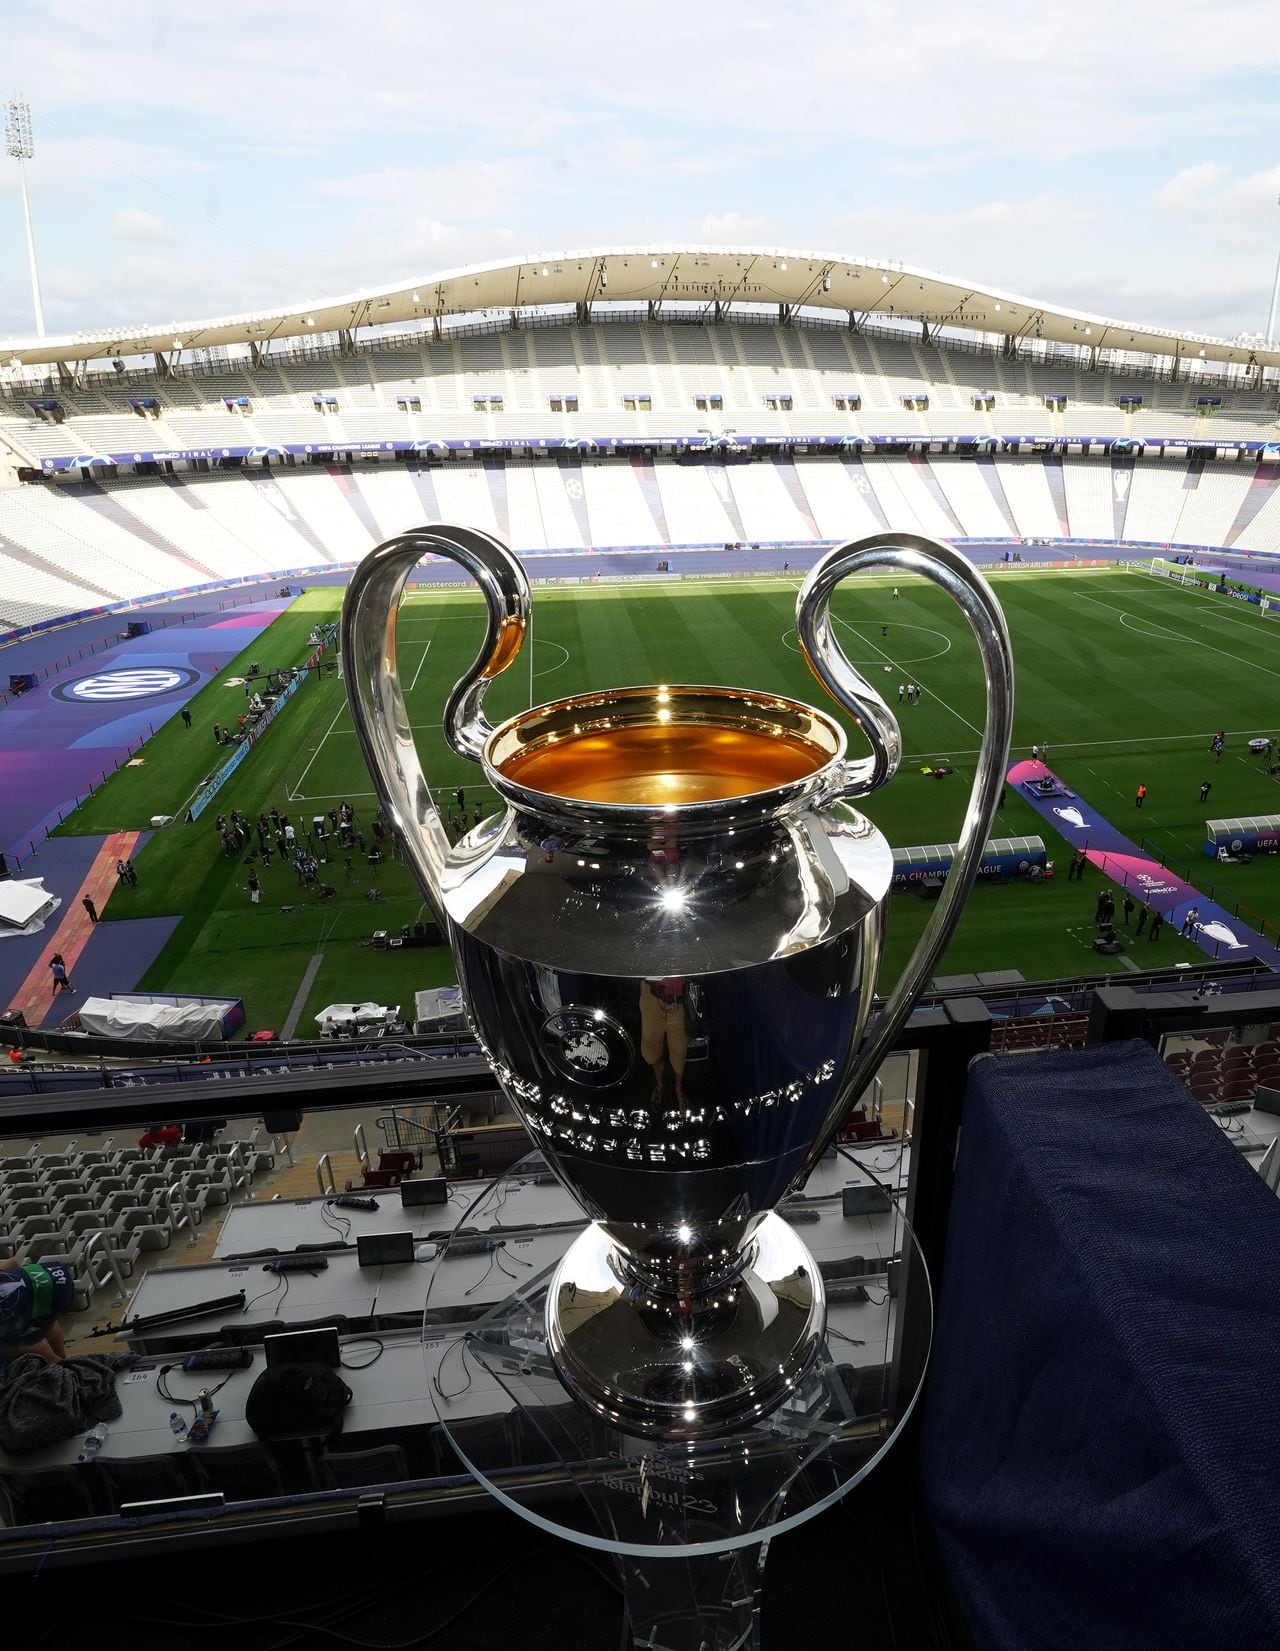 A general view of the UEFA Champions League Trophy on display at the Ataturk Olympic Stadium, Istanbul, ahead of Saturday's UEFA Champions League Final between Manchester City and Inter Milan. Picture date: Friday June 9, 2023. (Photo by Nick Potts/PA Images via Getty Images)